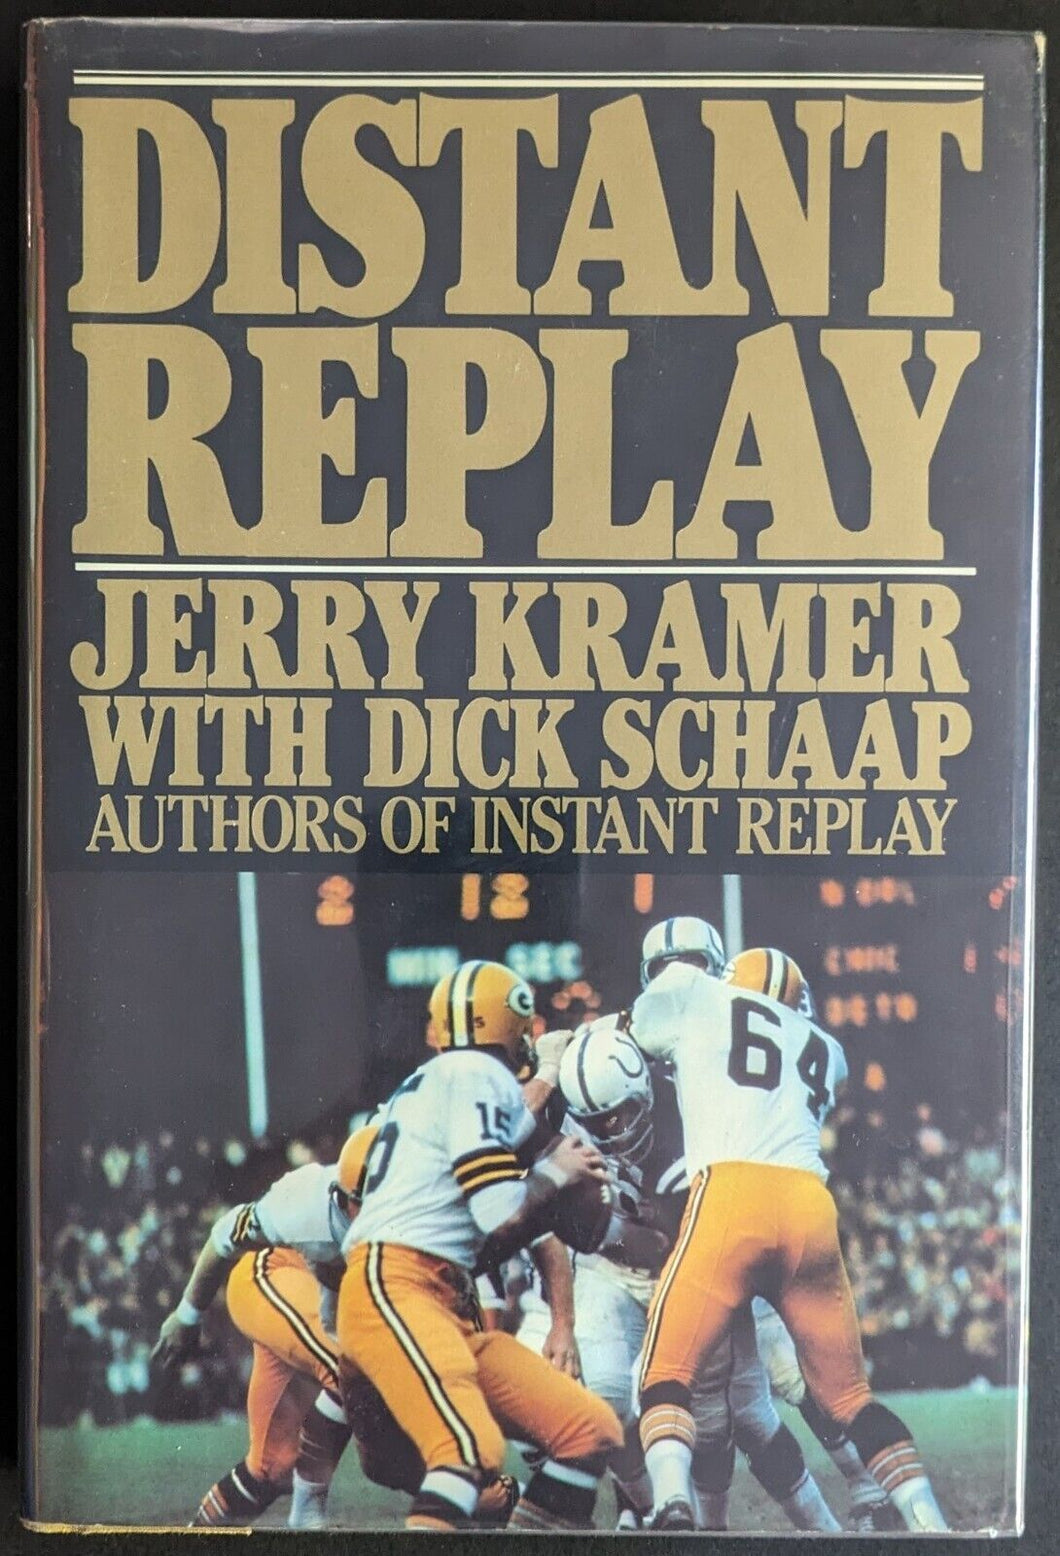 Distant Replay Jerry Kramer Autographed Signed Book NFL Green Bay Football